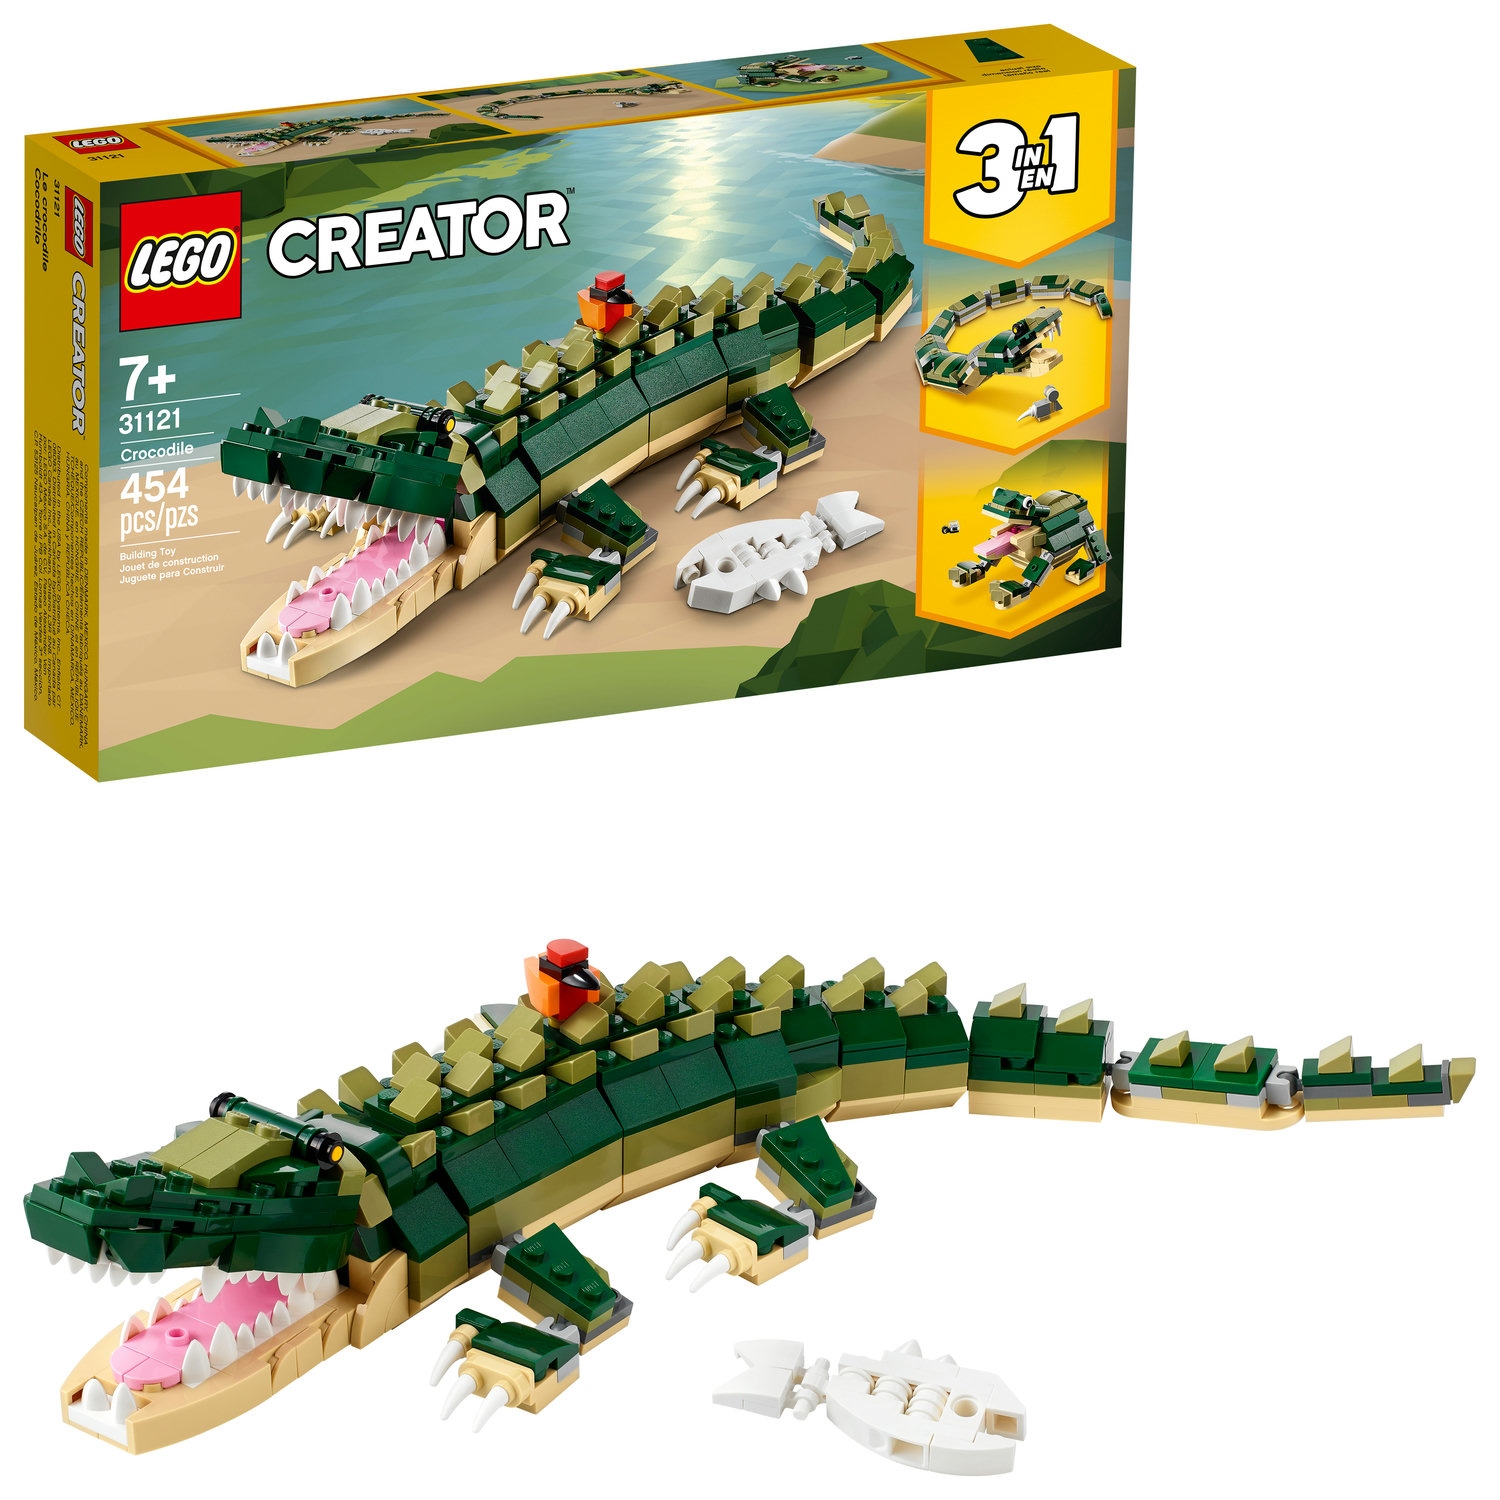 LEGO Creator 3in1 Crocodile 31121 Building Toy Featuring Wild Animal Toys for Kids (454 Pieces) - image 1 of 10